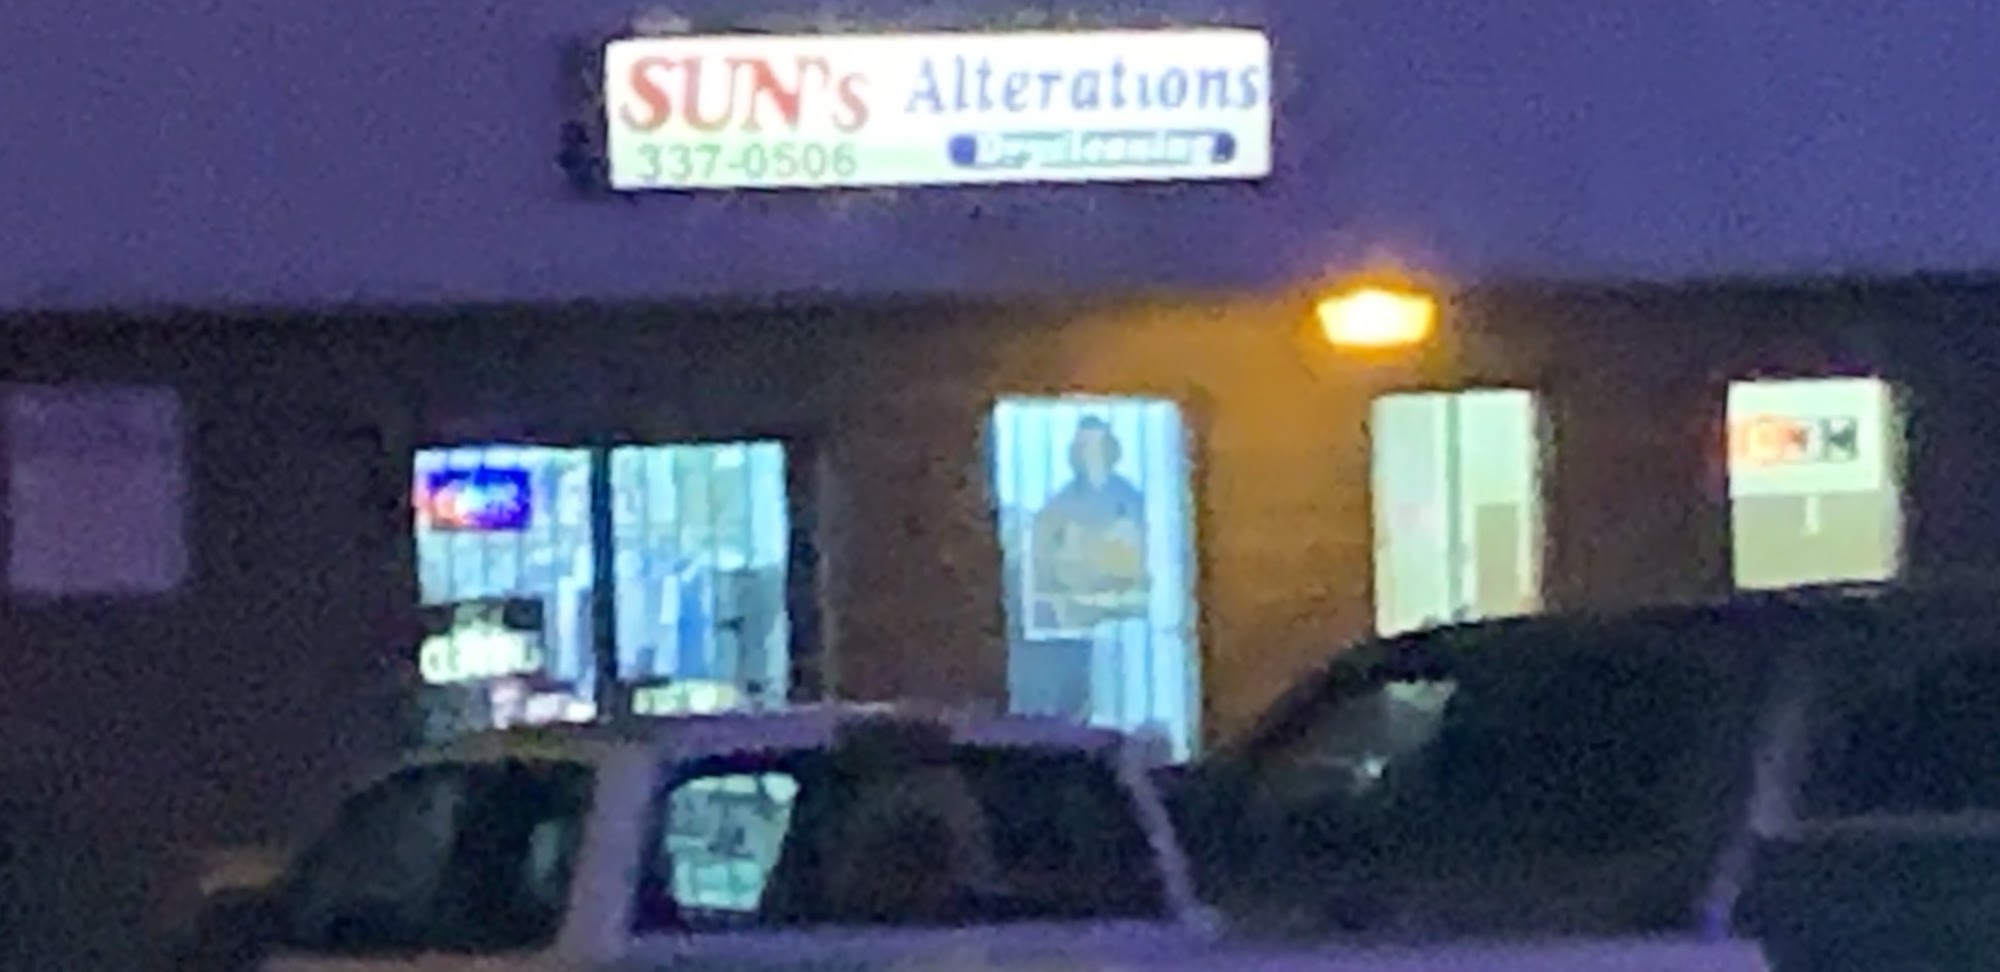 Sun's Alterations & Dry Clean